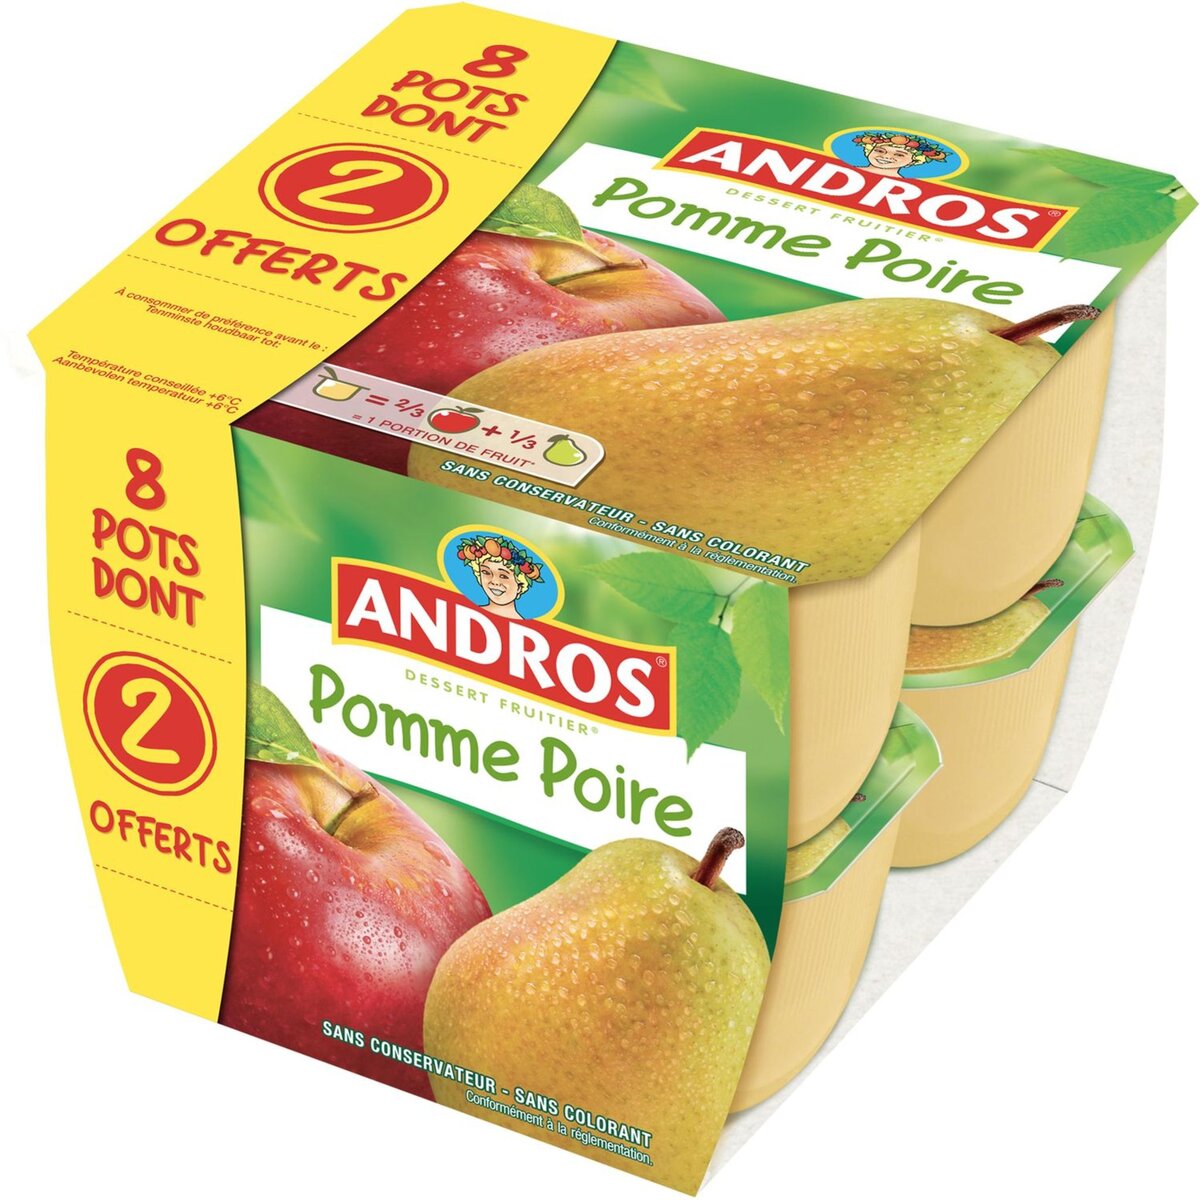 ANDROS Andros compote pomme poire 8x100g dont 2offerts